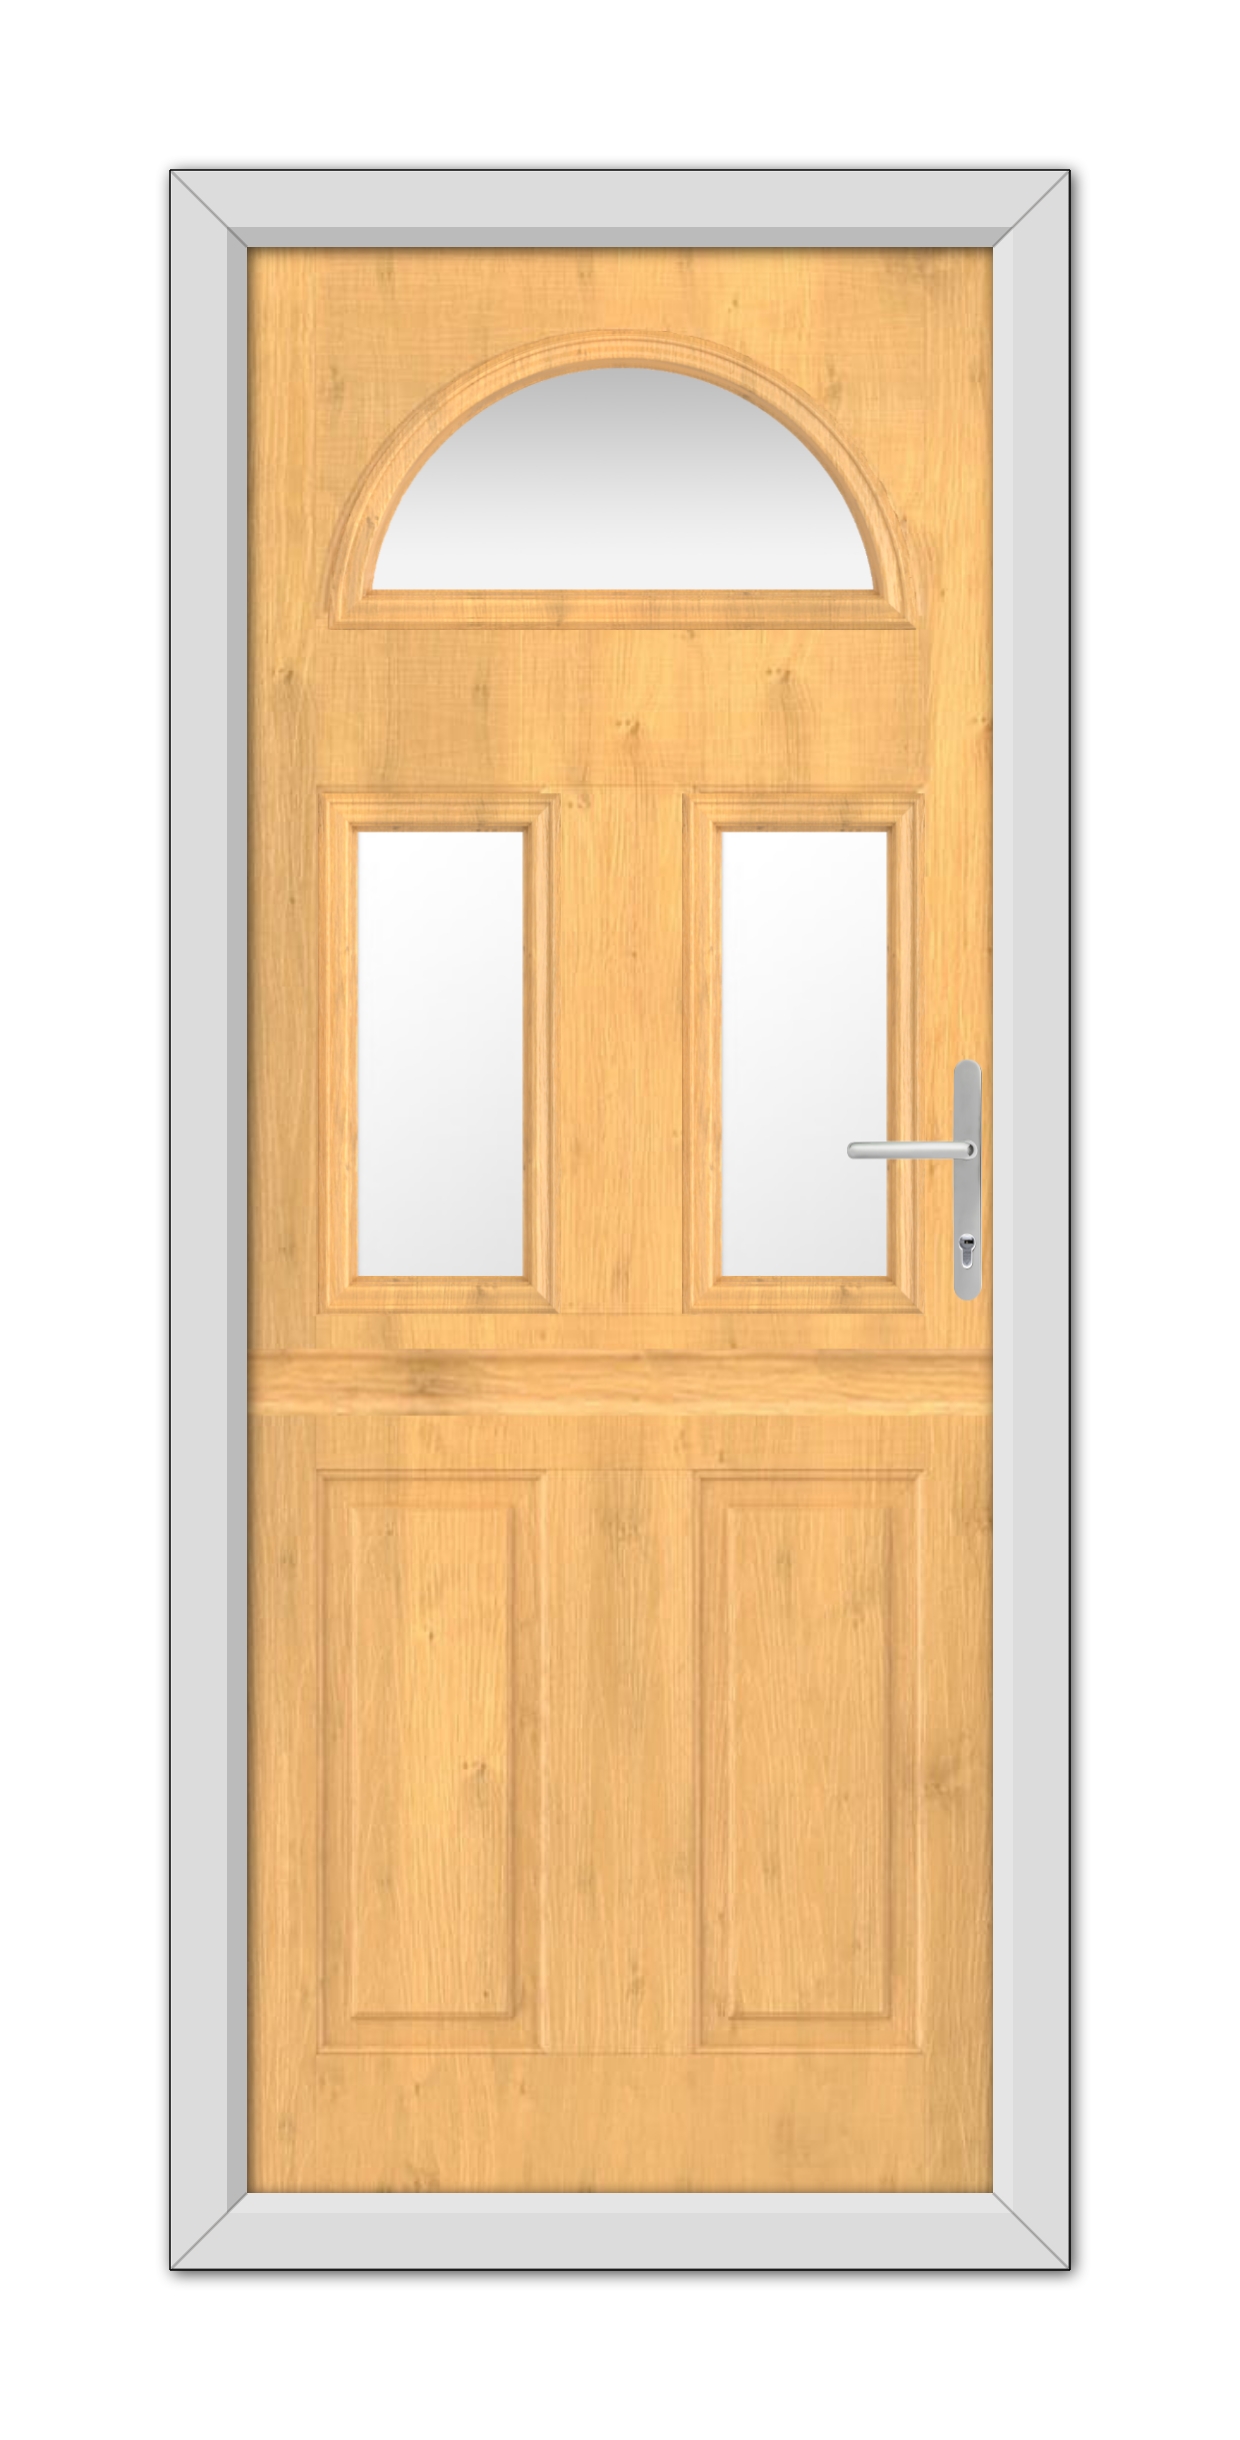 An Irish Oak Winslow 3 Stable Composite Door 48mm Timber Core with a semicircular arch window at the top, two square windows in the center, and a metal handle on the right side, set in a gray frame.